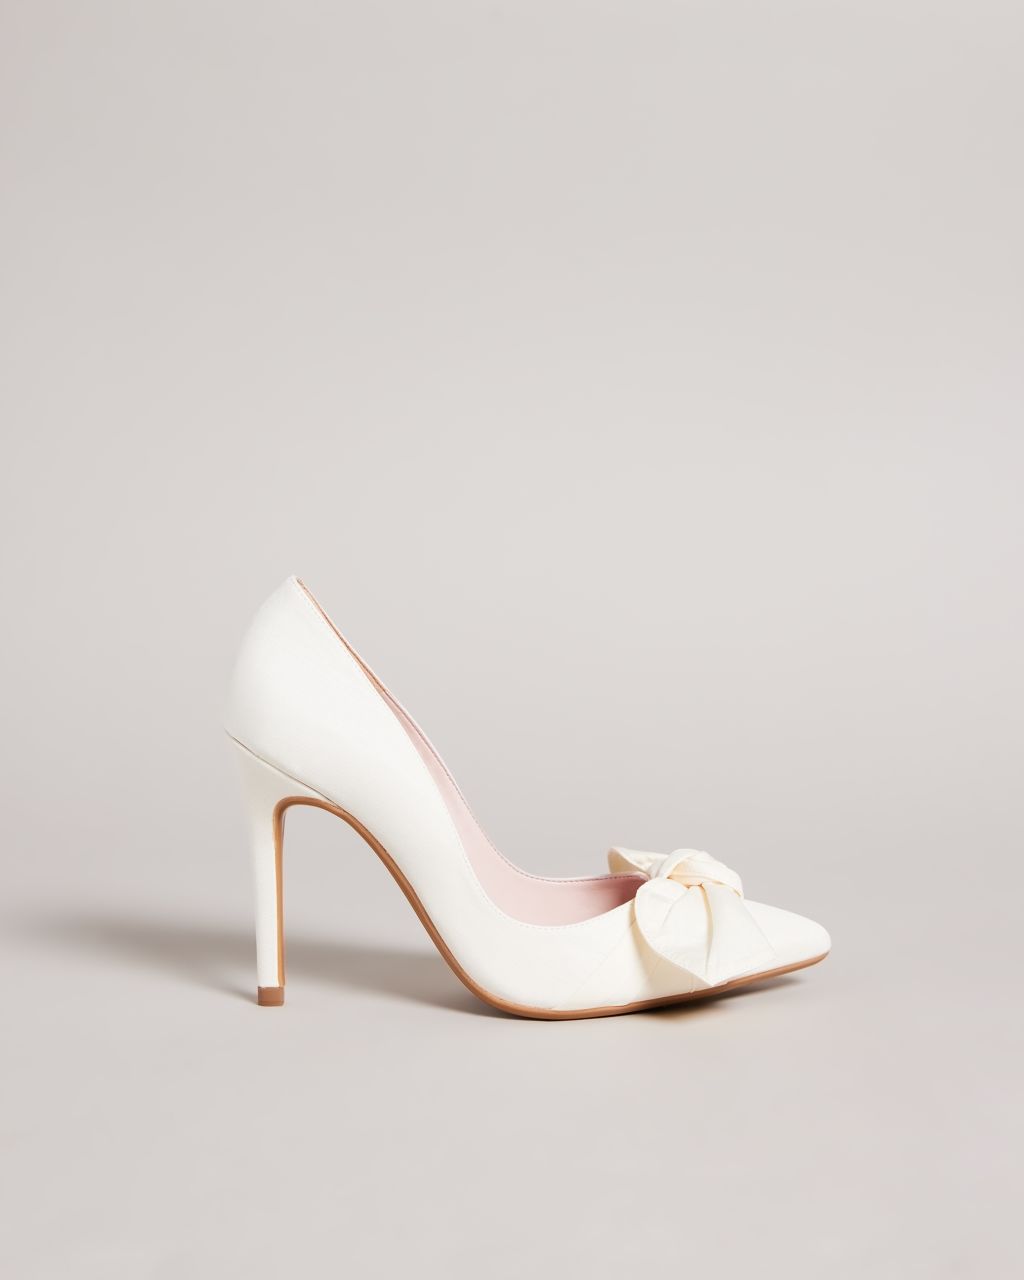 Ted Baker Women's Moire Satin Bow Court Shoes in Ivory, Hyana